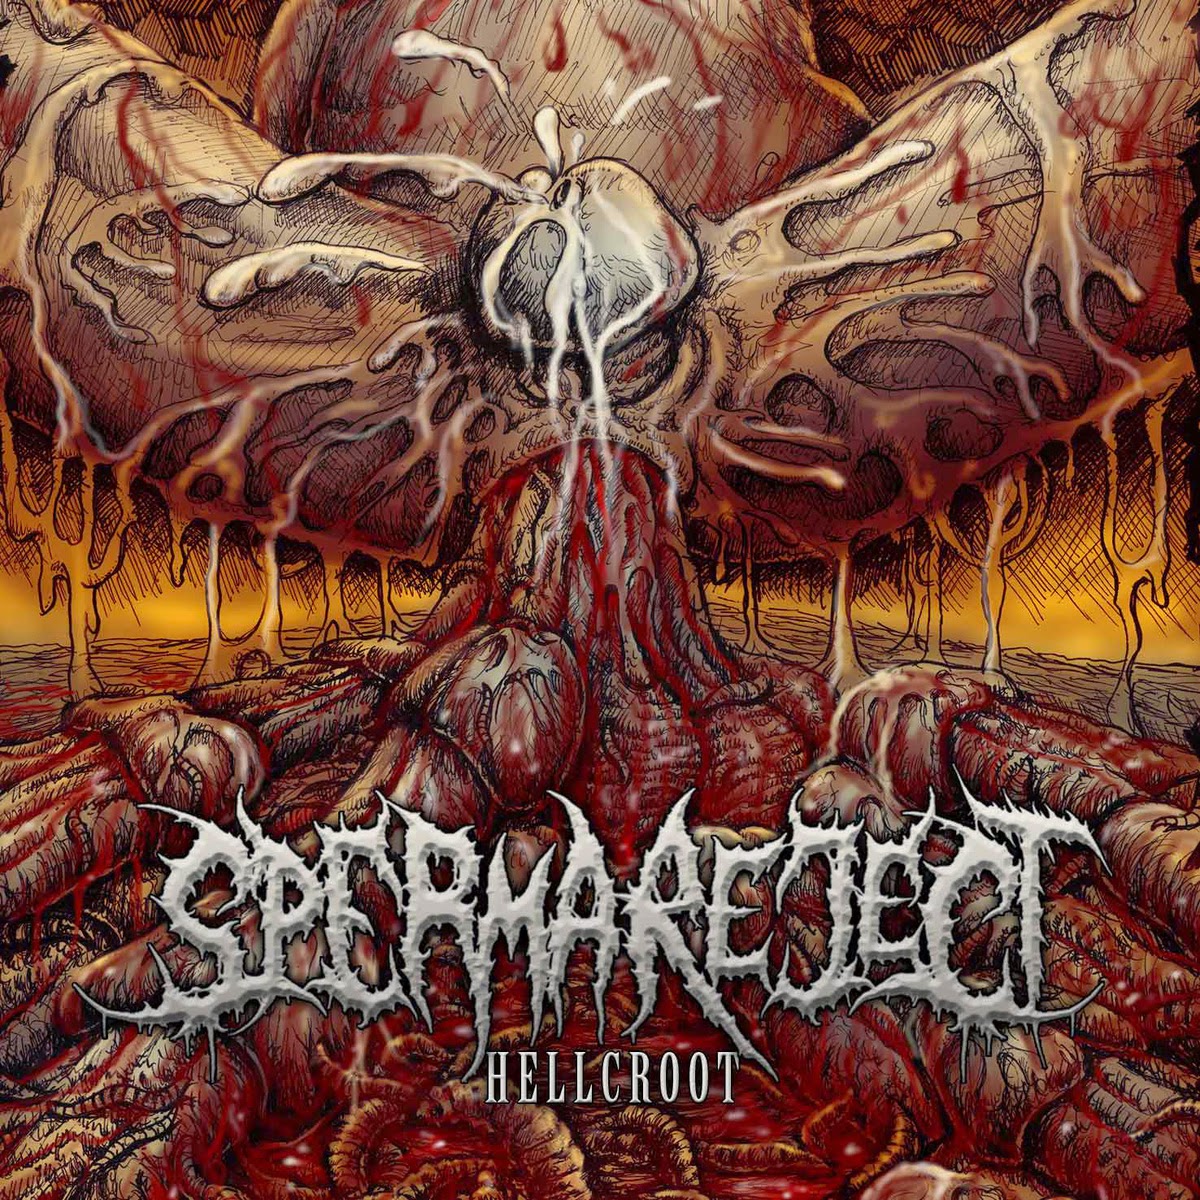 Sperma Reject - Hellcroot EP 2014 | LOSTINCHAOS REVIEW | All ...